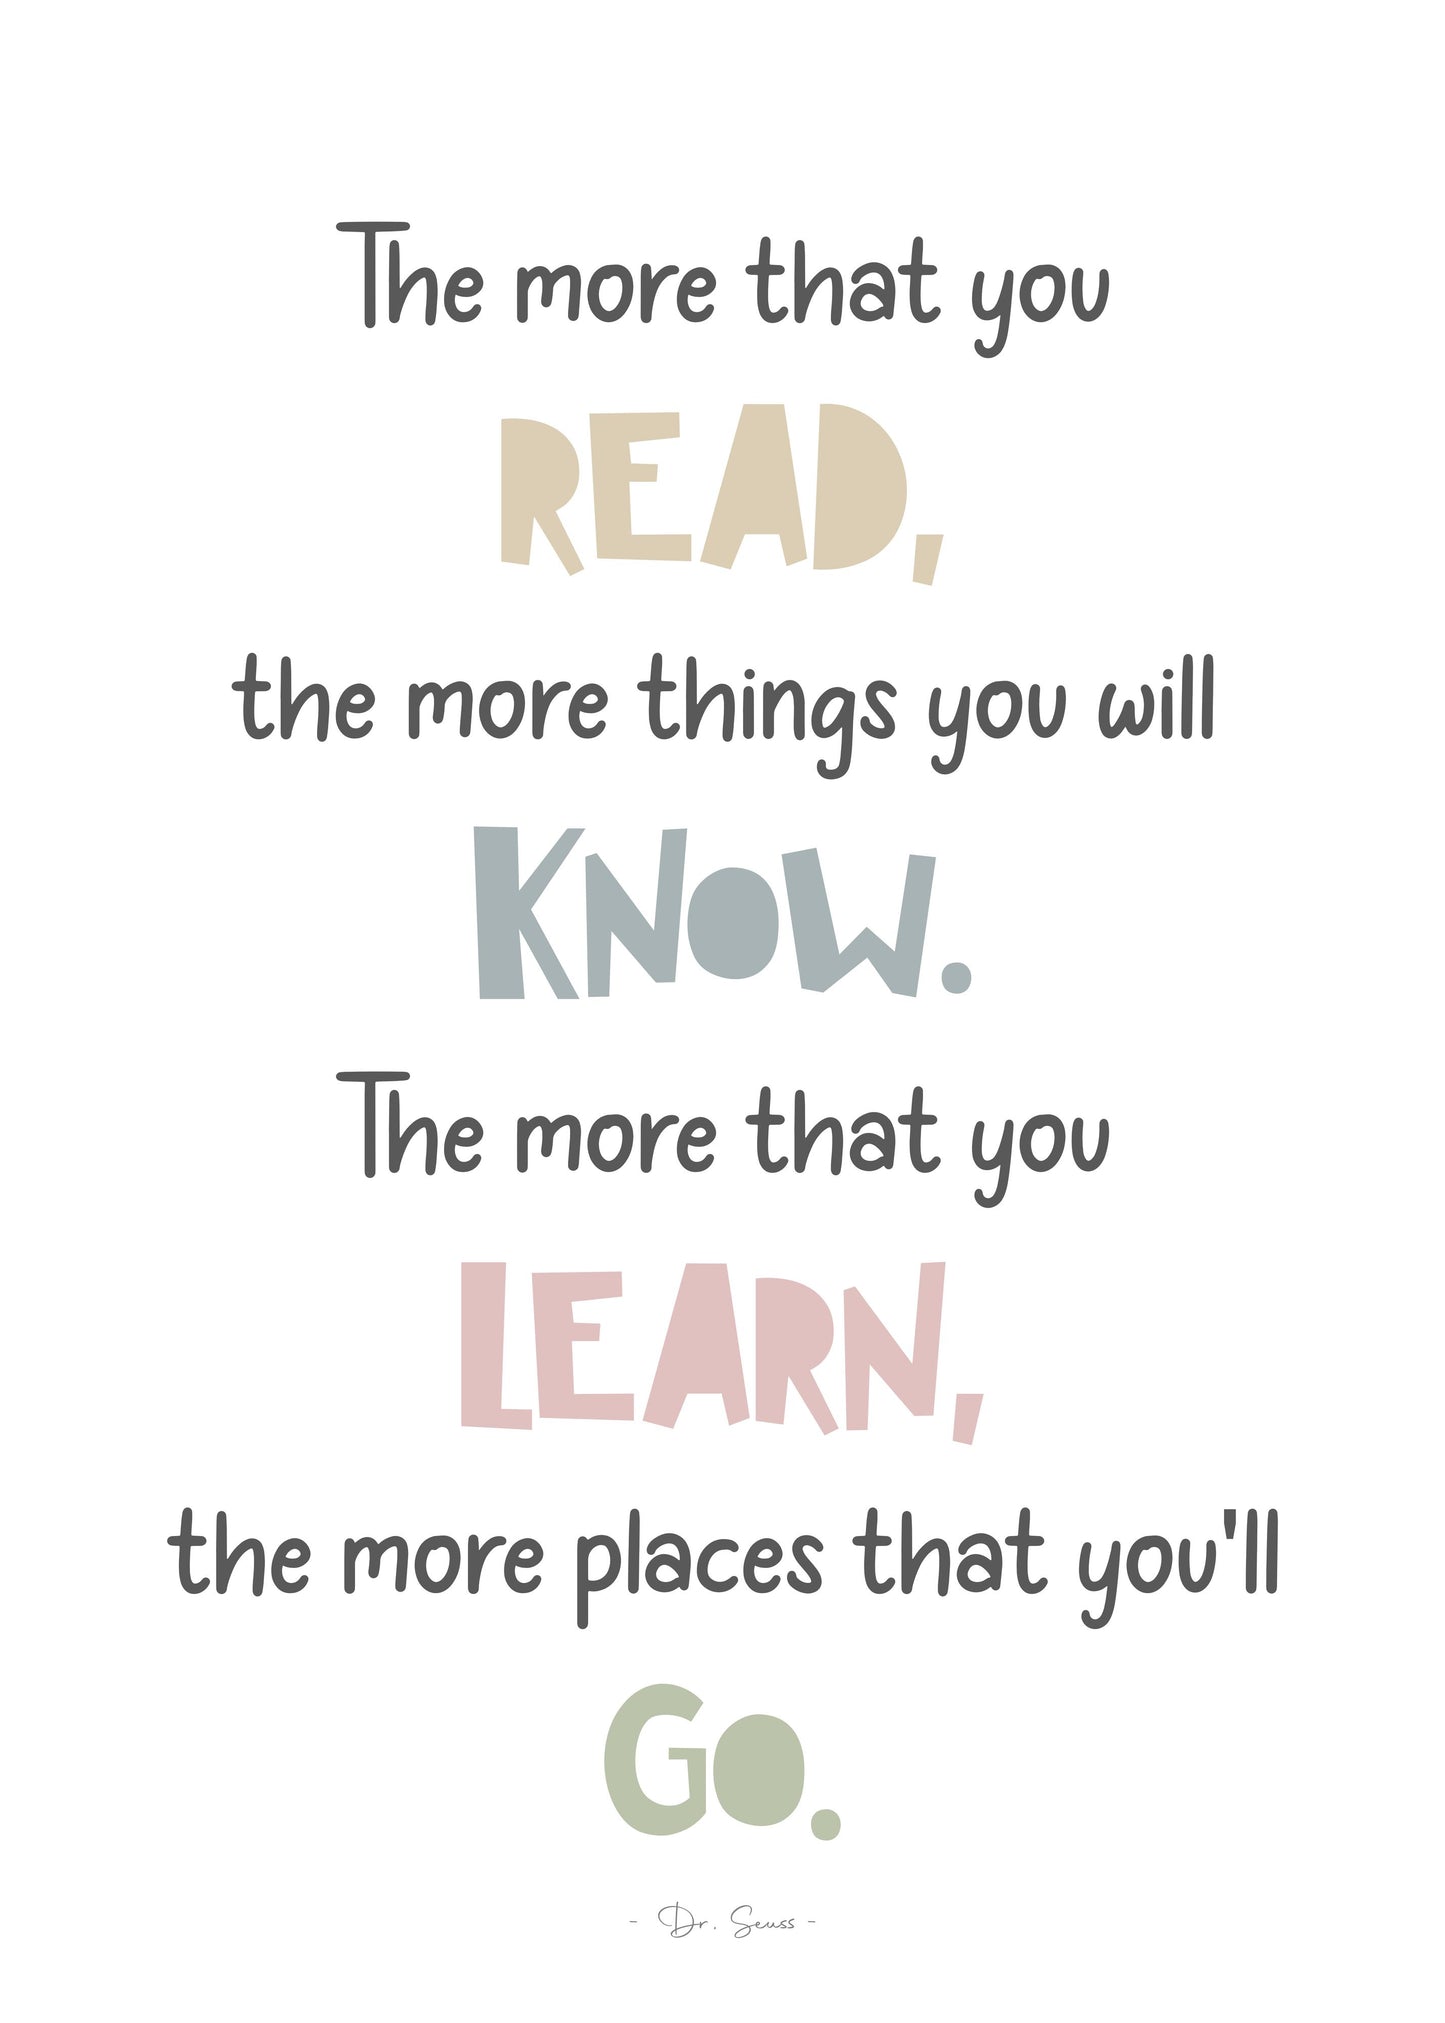 Read, Learn, Know, Go